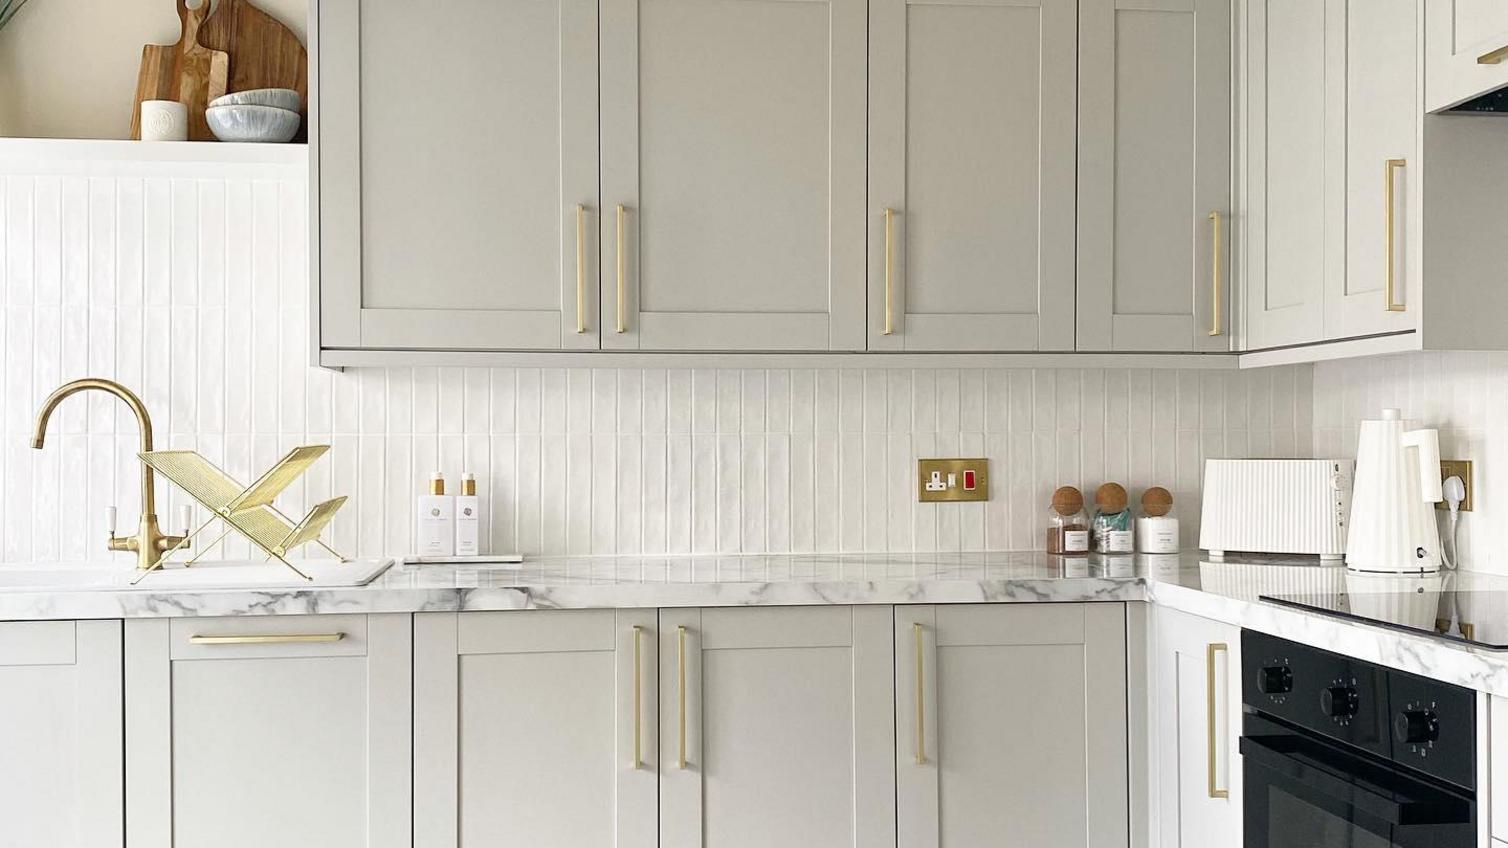 A bright white shaker kitchen accented in gold, with a backing of clean white wooden wall panelling